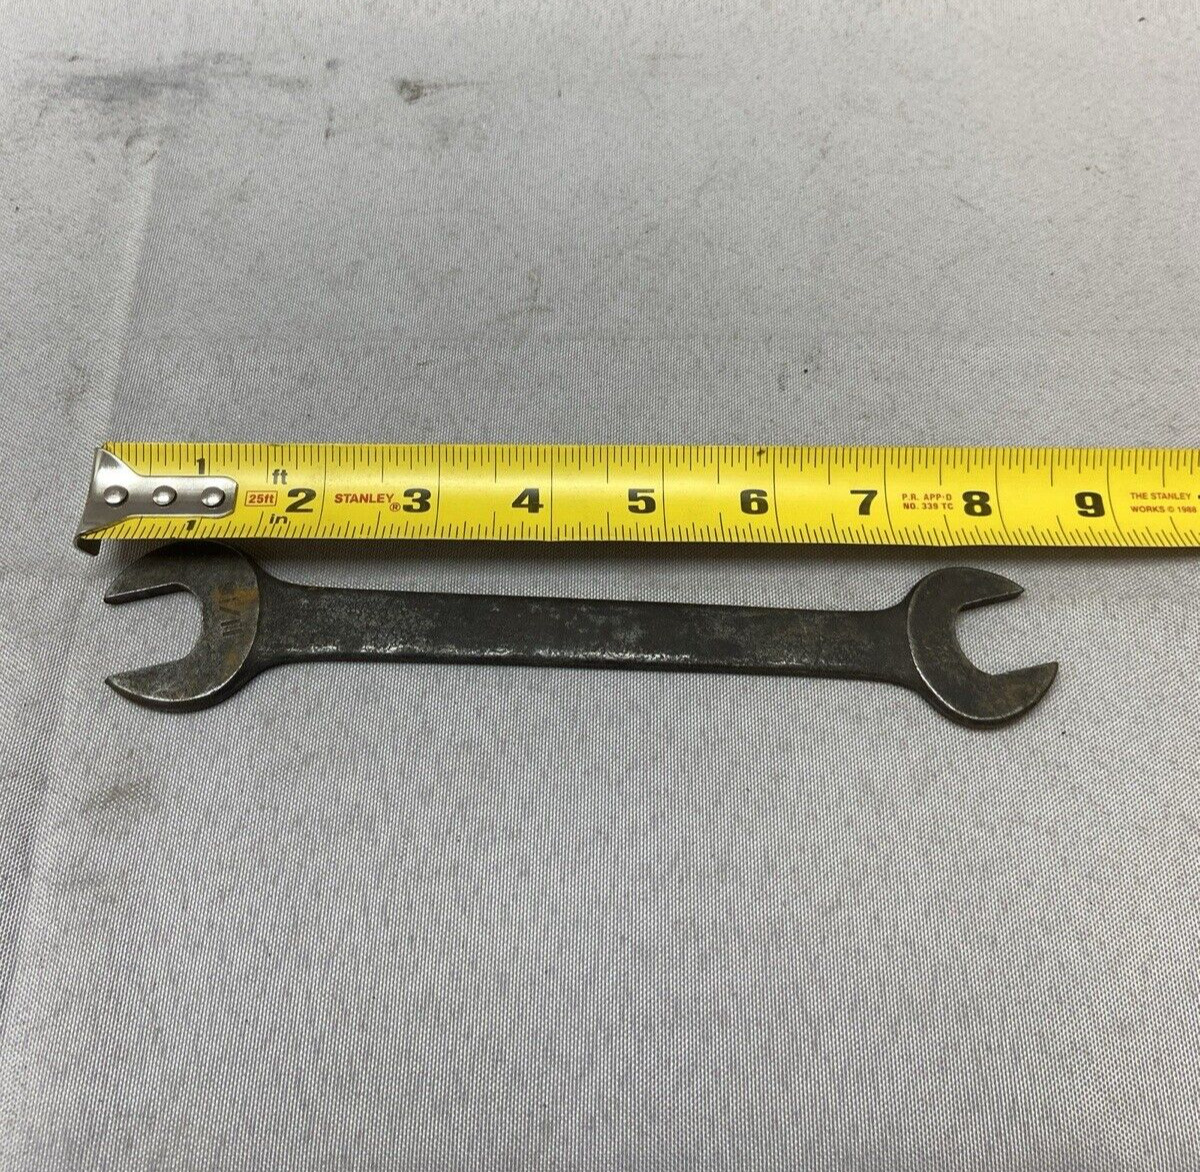 Vintage Vlchek Chrome Molybdenum Open End Wrench Number 93. 11/16 and 5/8